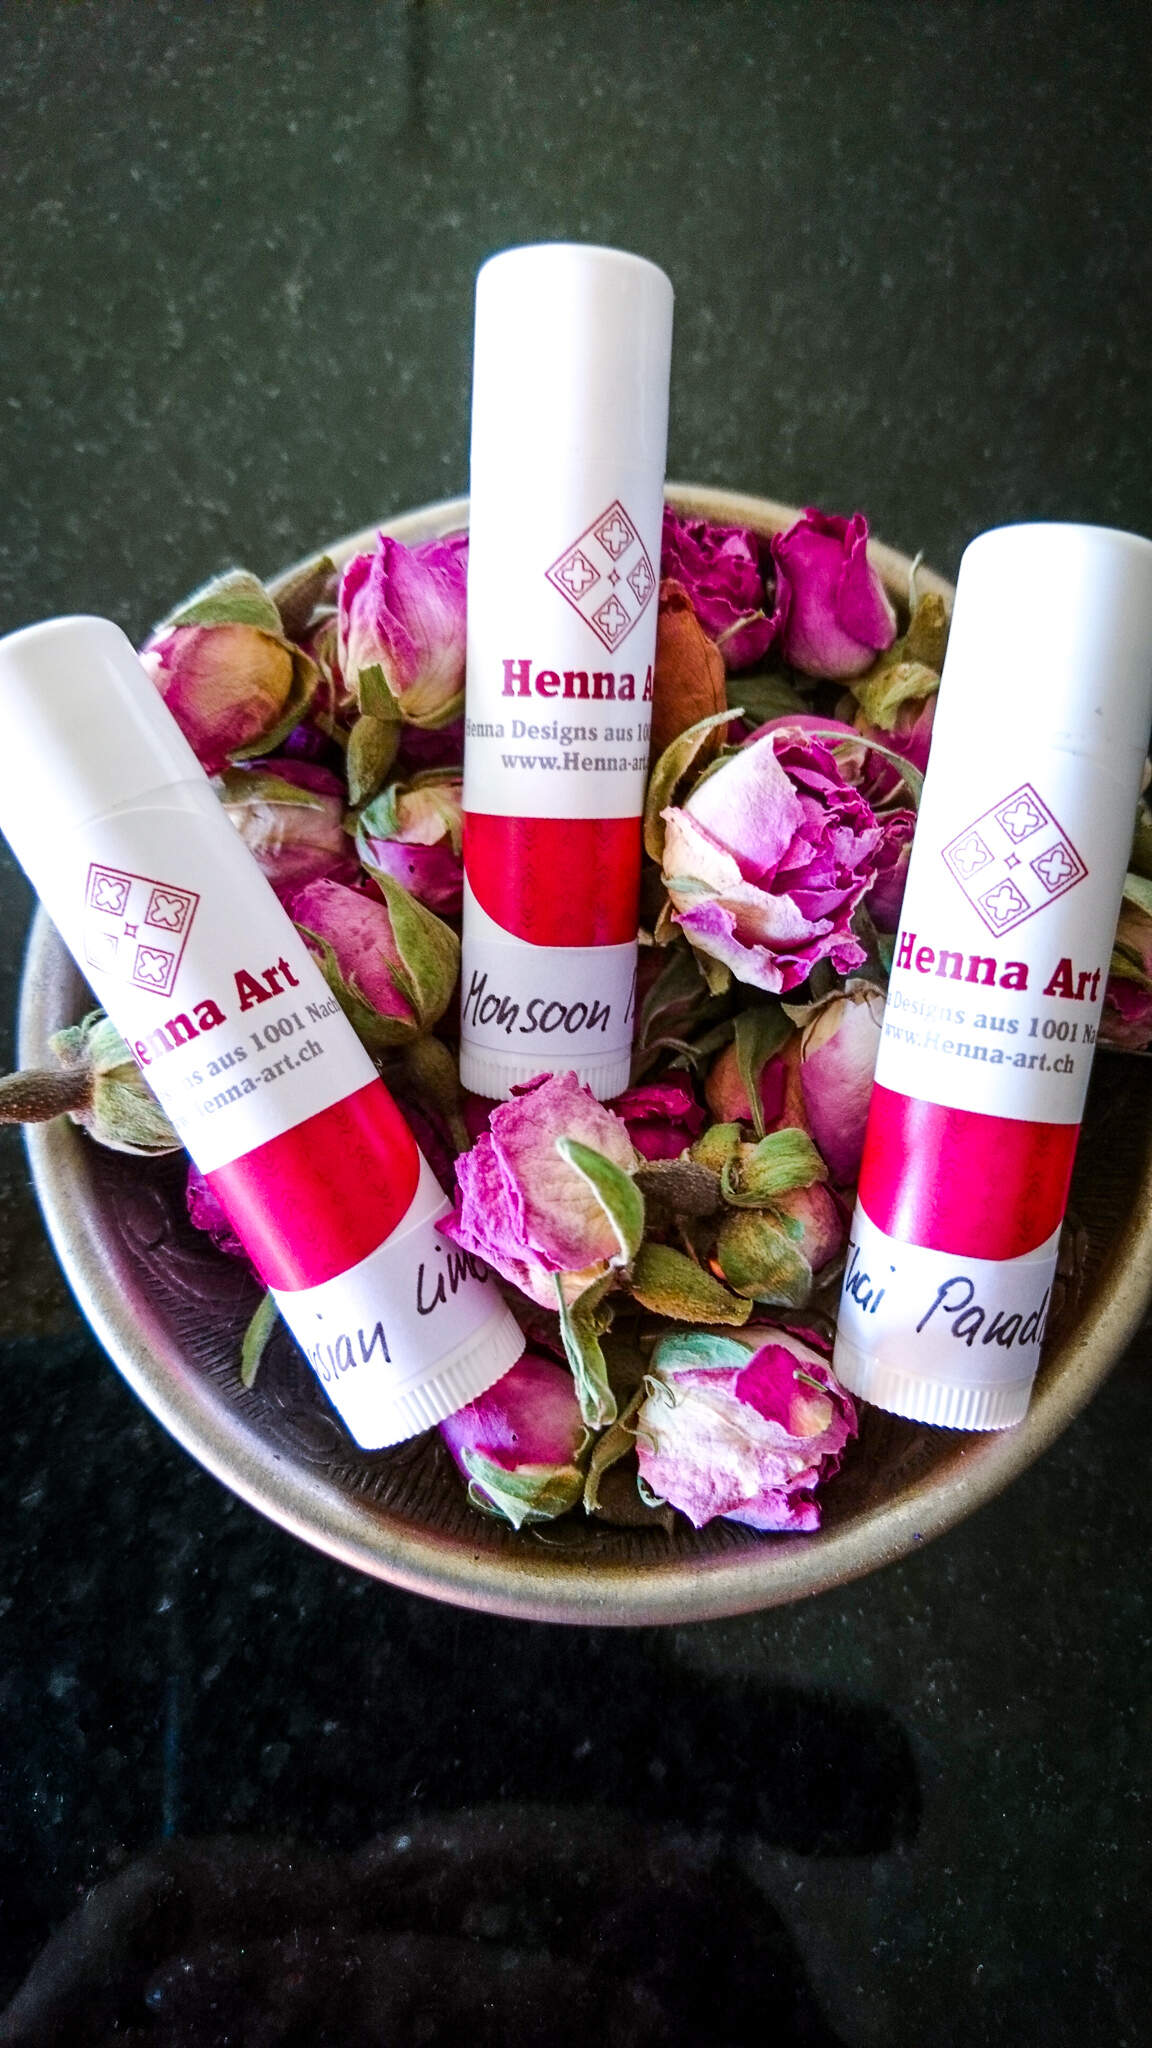 Henna after care Balm